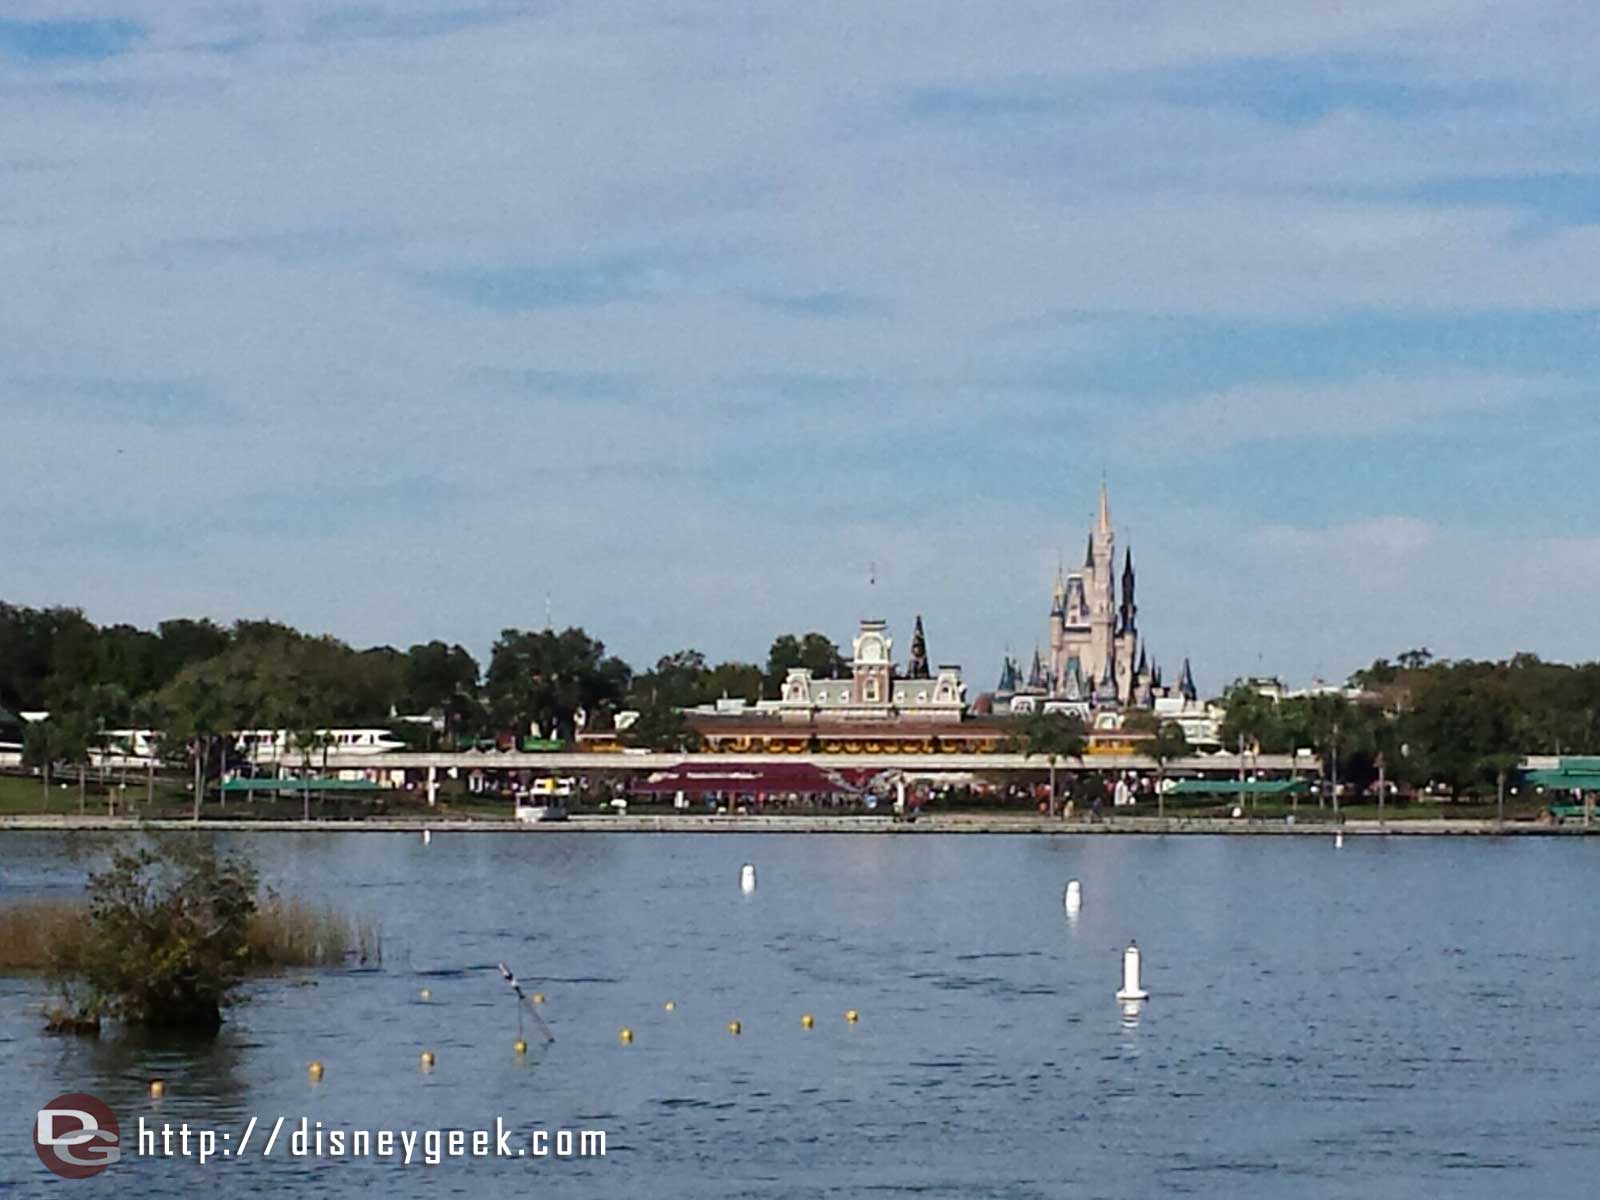 Always an impressive and fun view to approach the Magic Kingdom by Ferry.. I highly recommend this to first time visitors. Unfortunately with the Disney buses dropping you off at the park now most do not experience this.